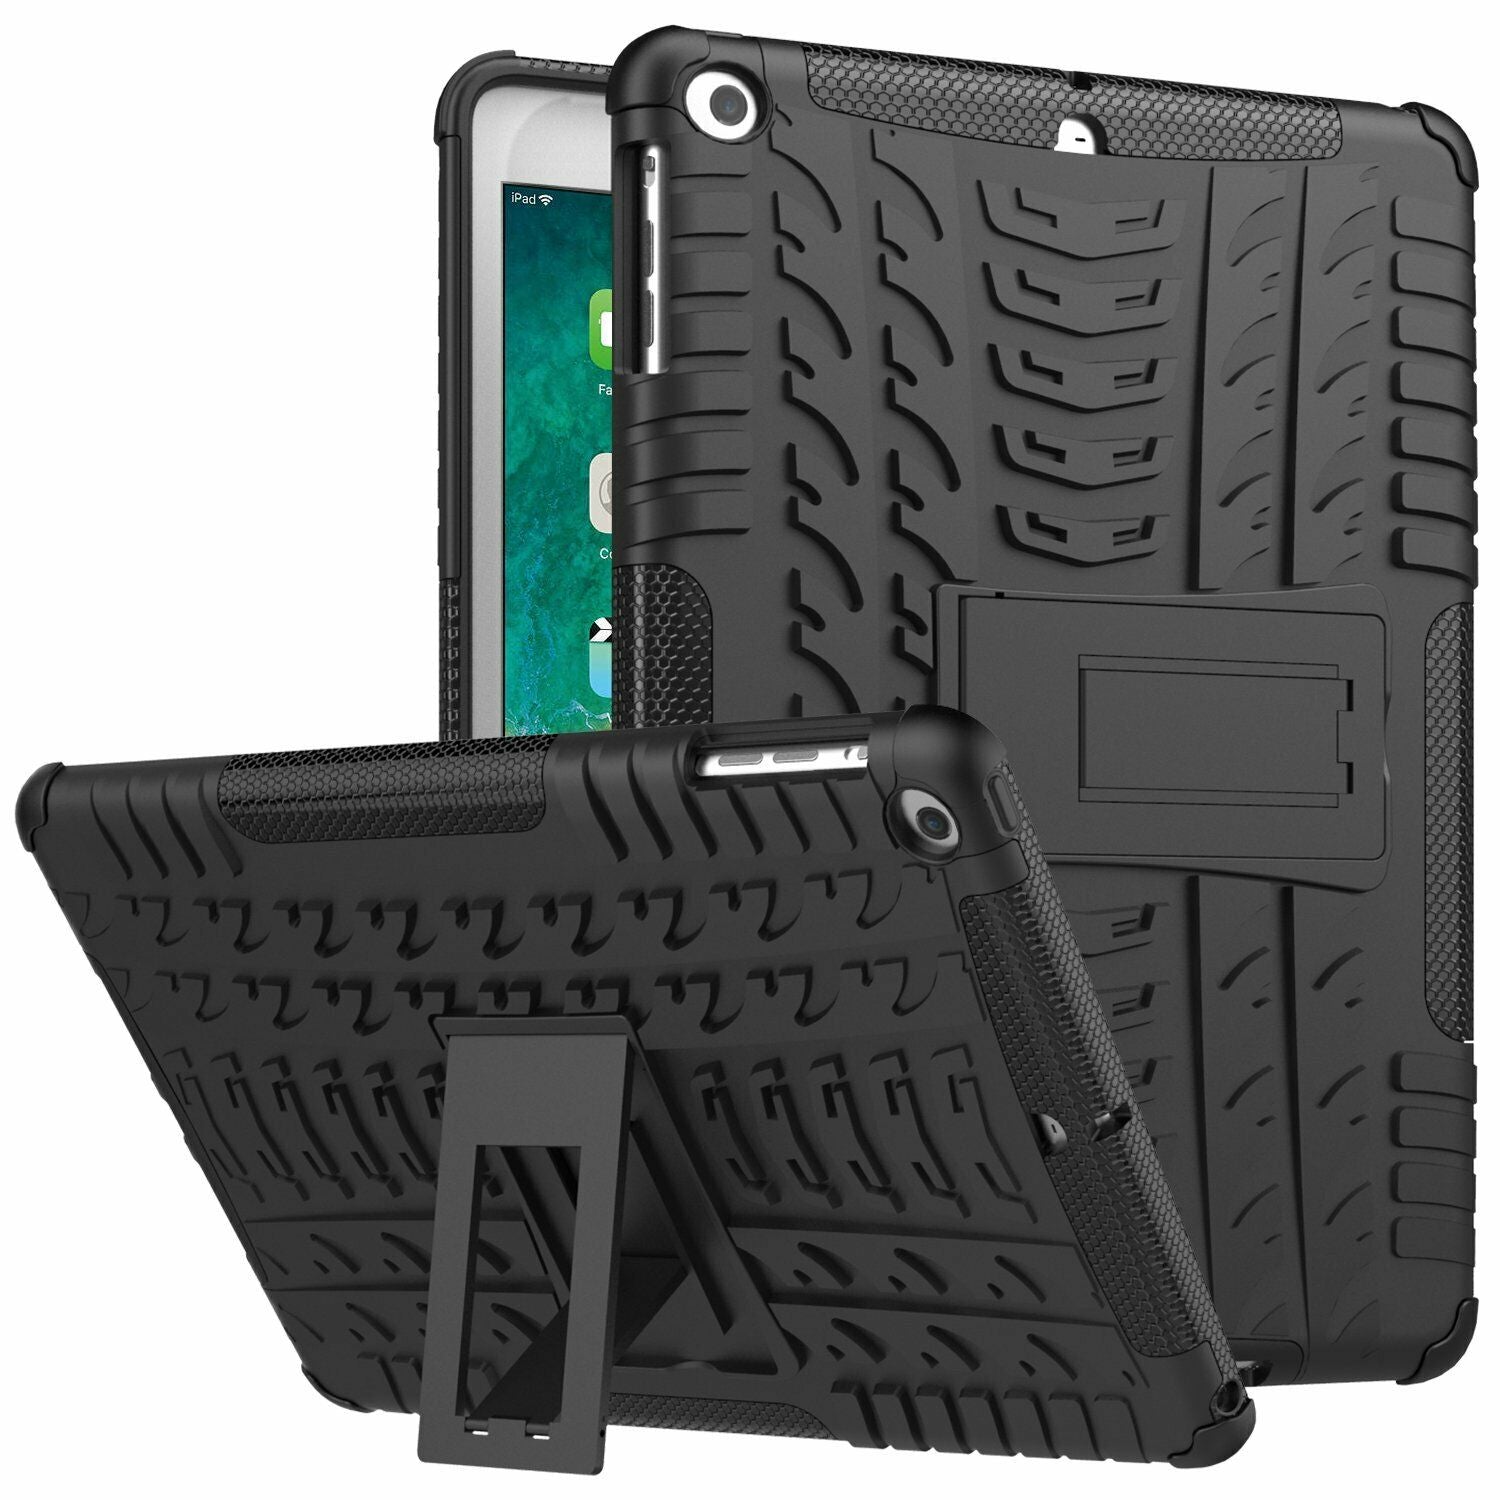 Shock proof Heavy Duty Case Cover For iPad Air 3